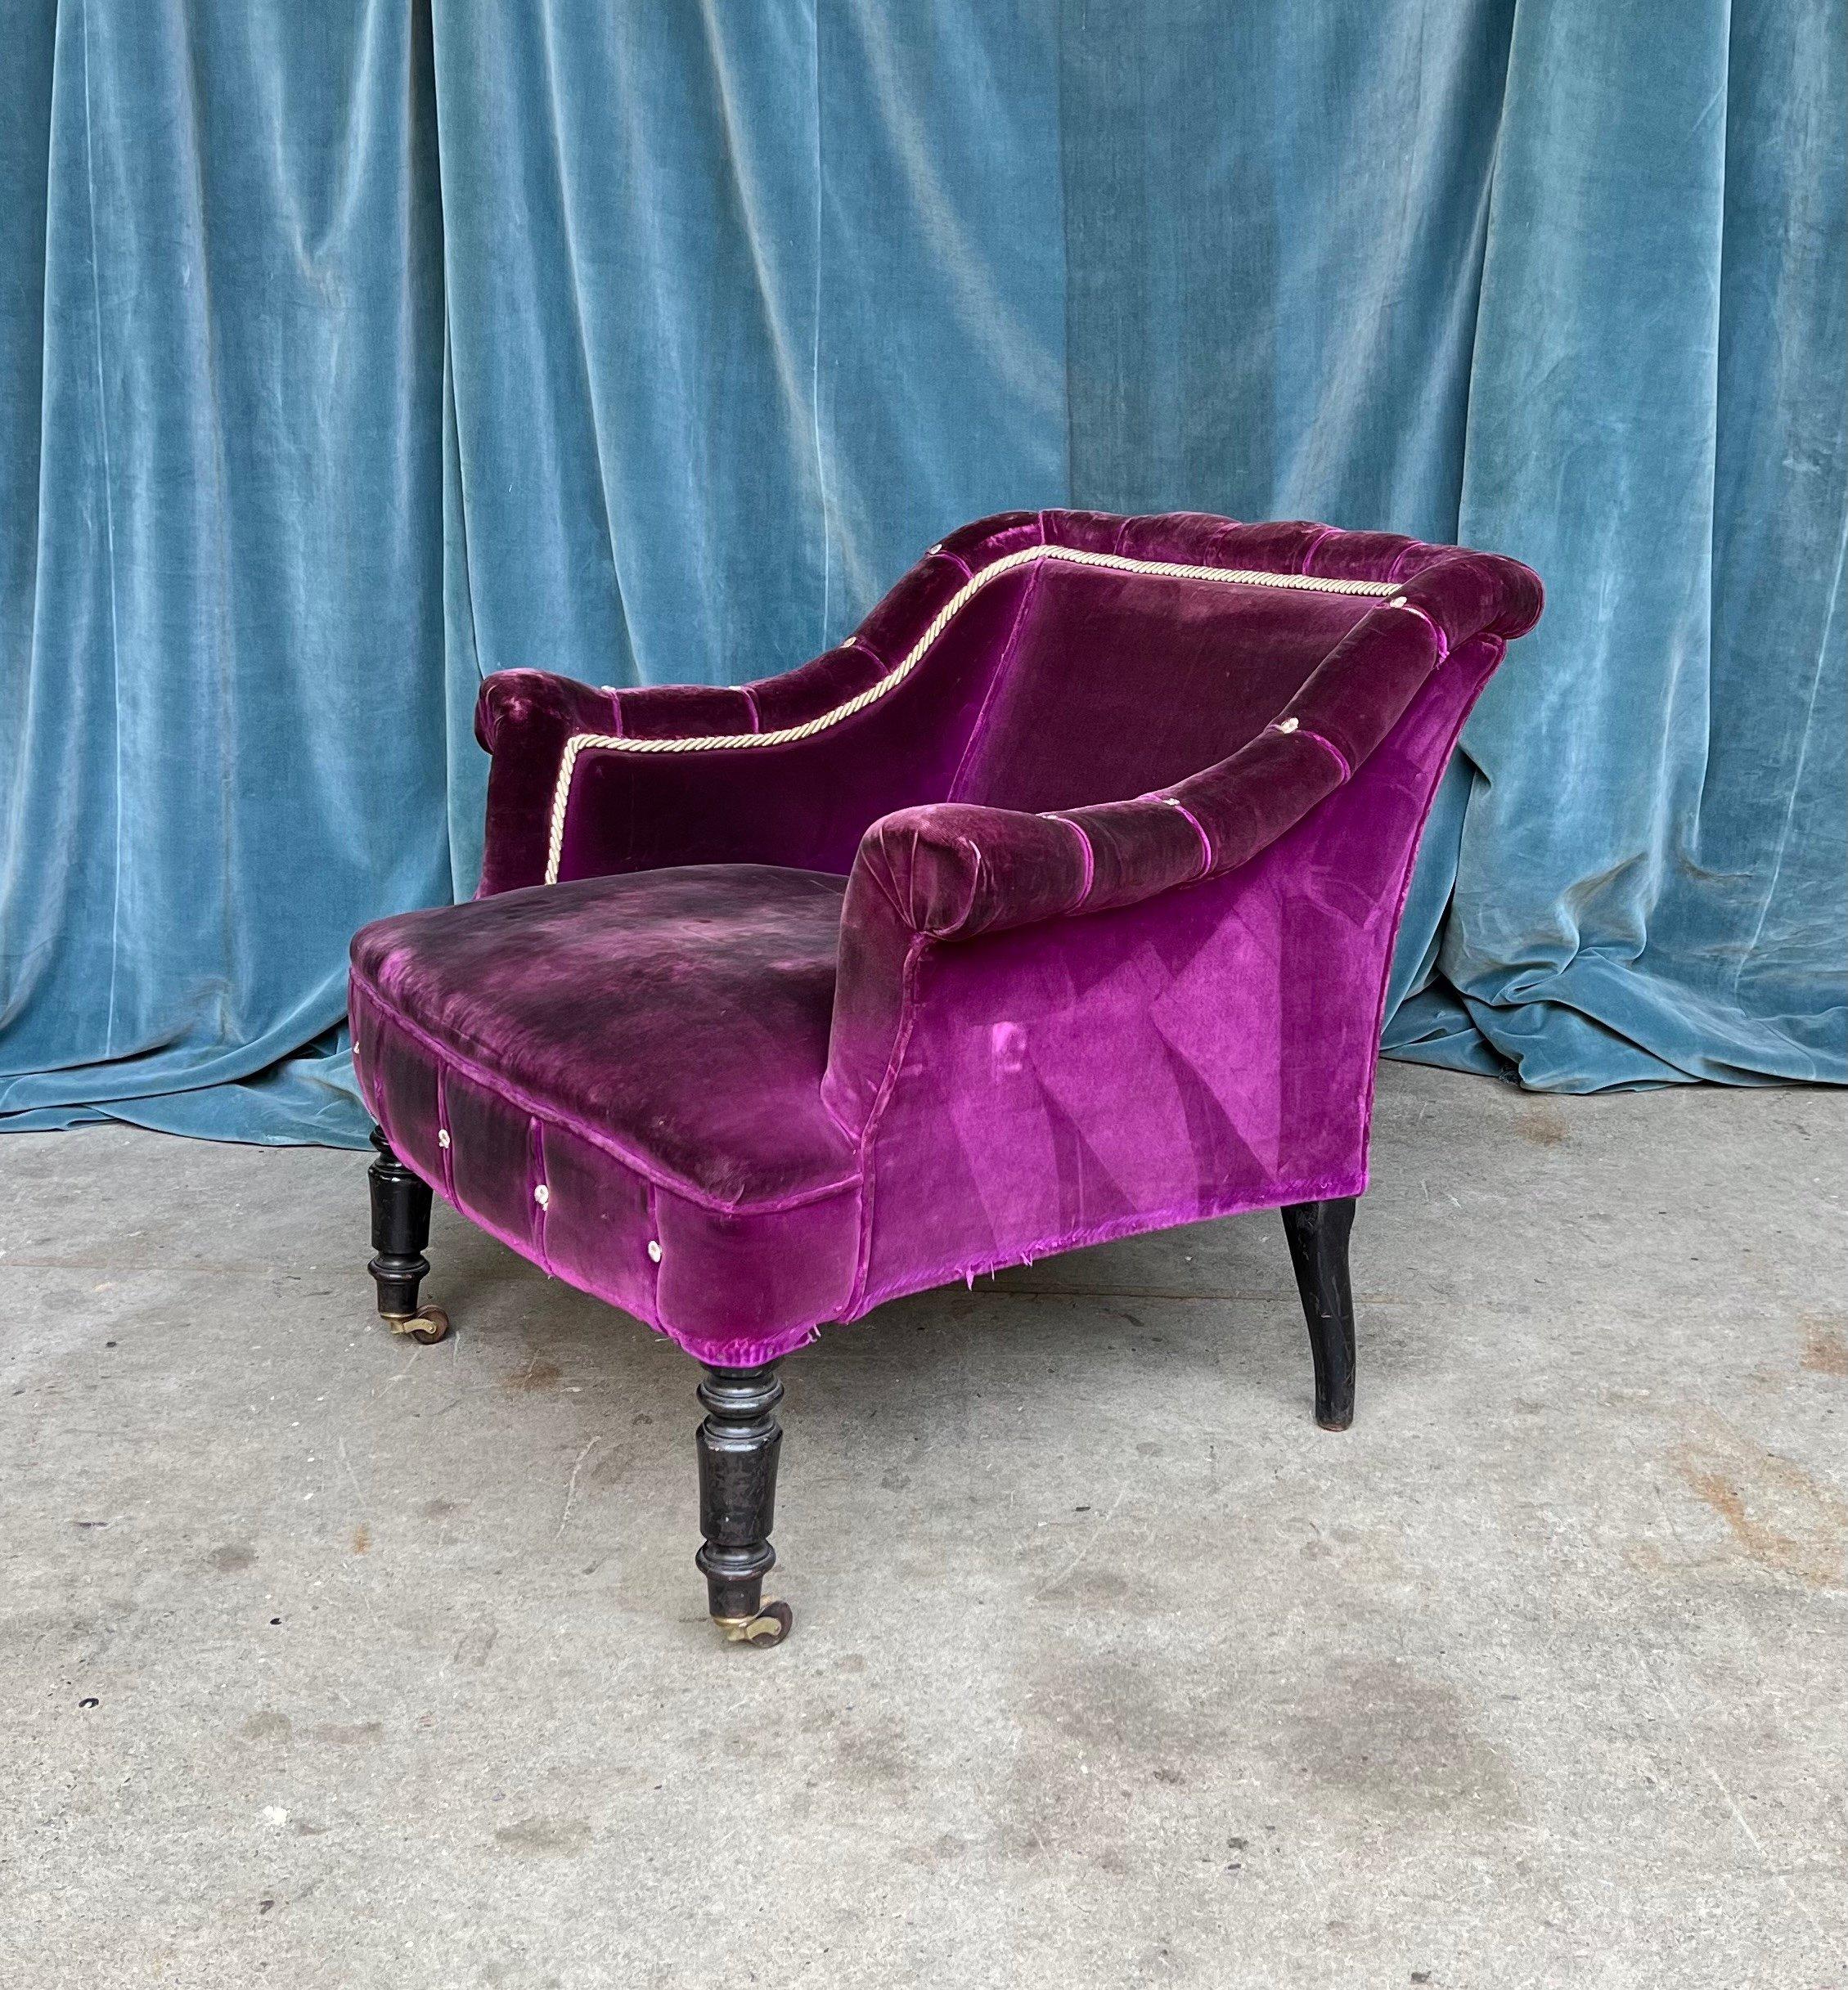 Upholstery French 19th Century Armchair in Distressed Purple Velvet with White Braided Trim For Sale